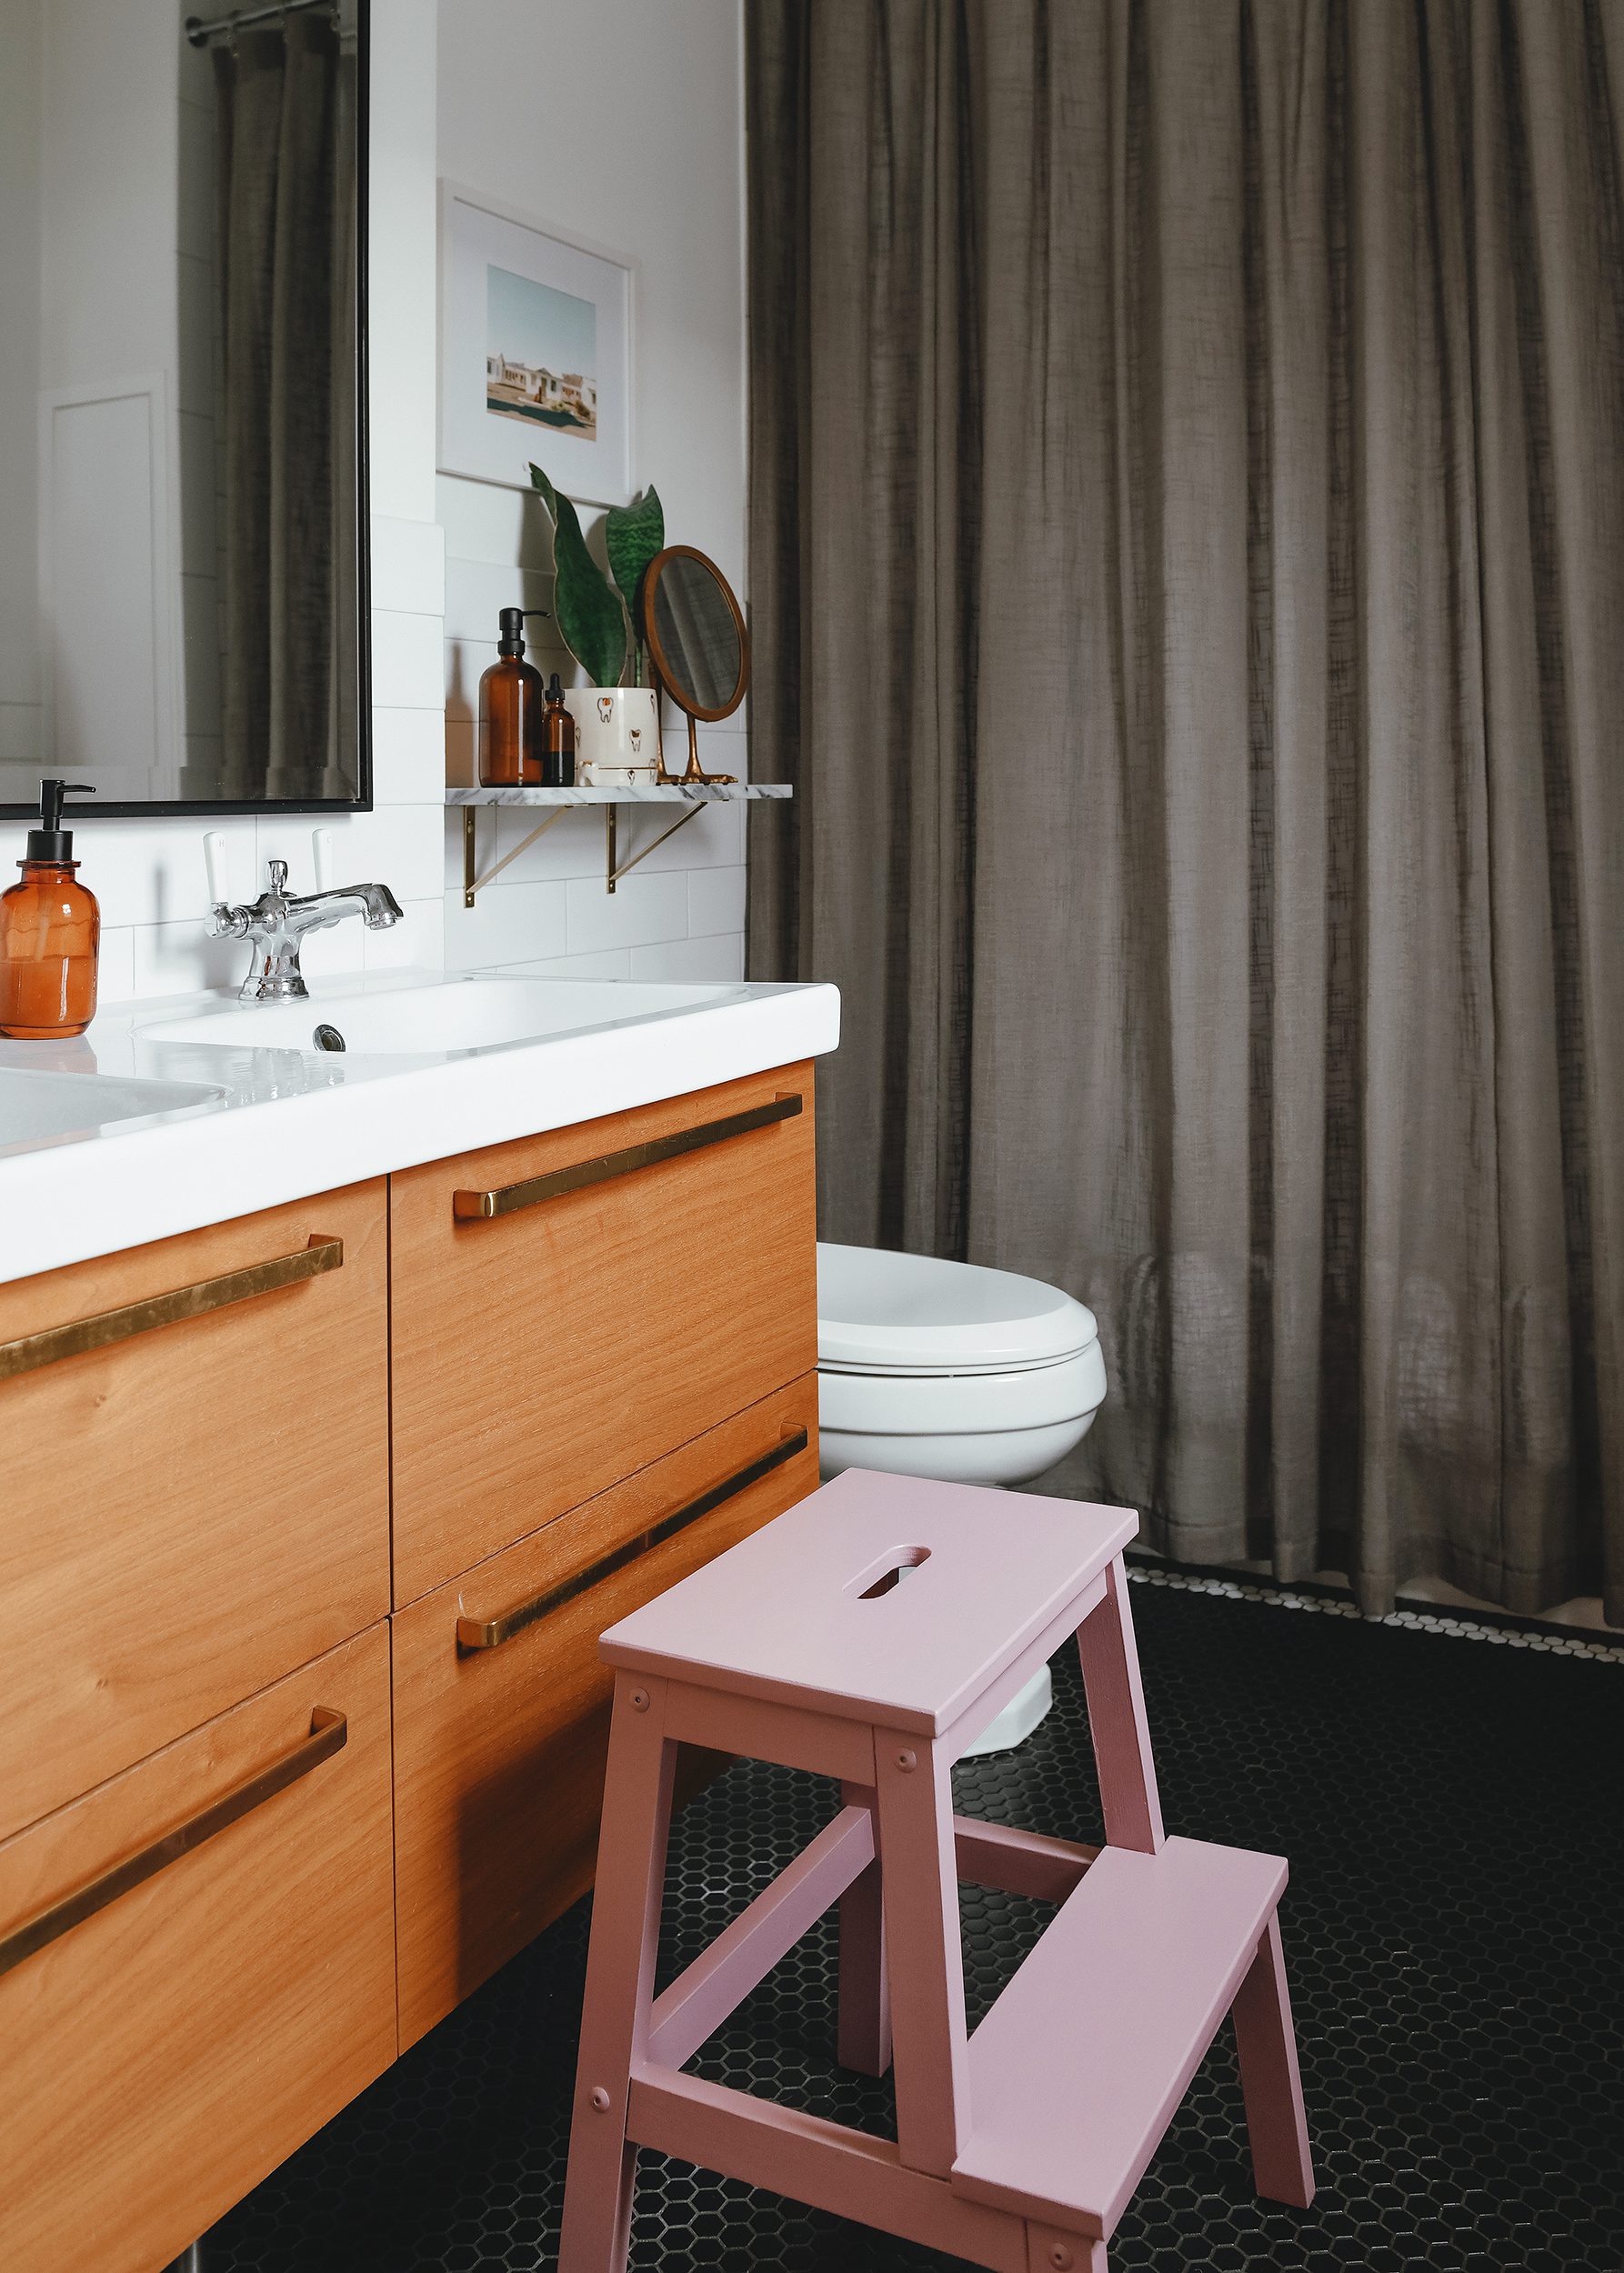 The finished painted stool in our primary bathroom | via Yellow Brick Home